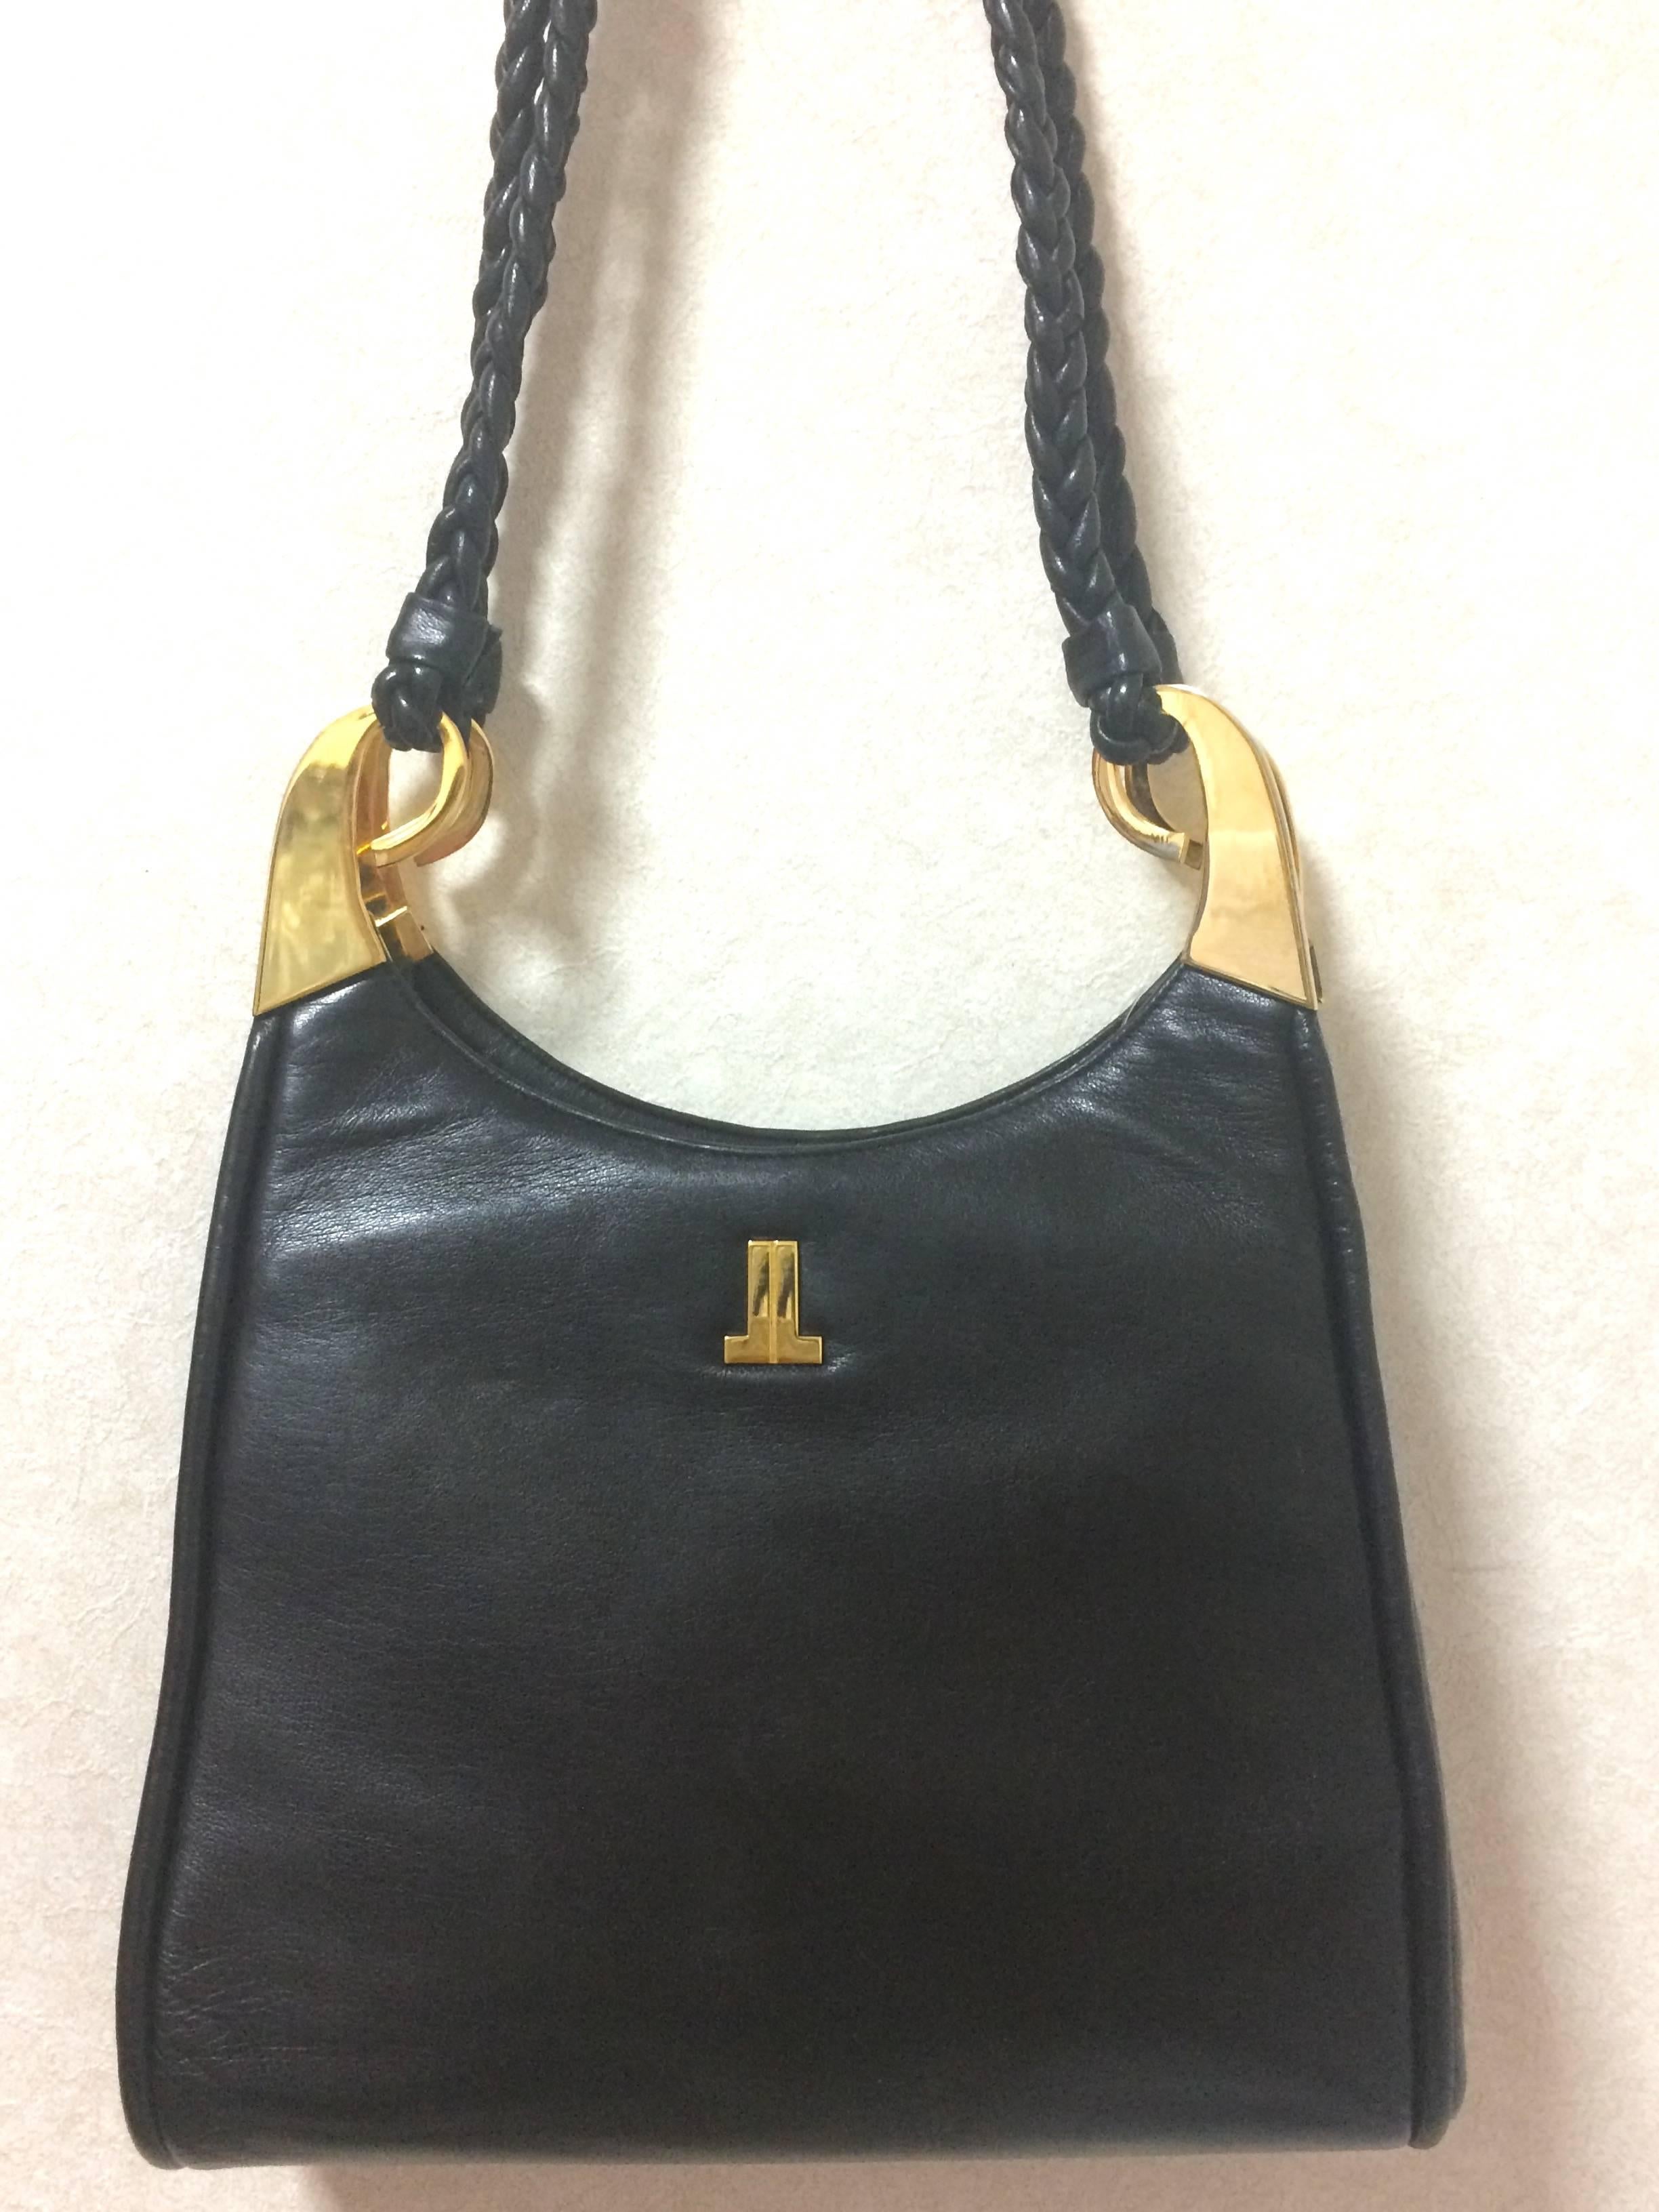 1970s, 1980s. Vintage LANVIN black leather trapezoid shape shoulder bag with kiss lock closure and snail design brass and braided straps. Masterpiece. 

70's - 80's vintage LANVIN rare black leather purse in a great condition, featuring its iconic